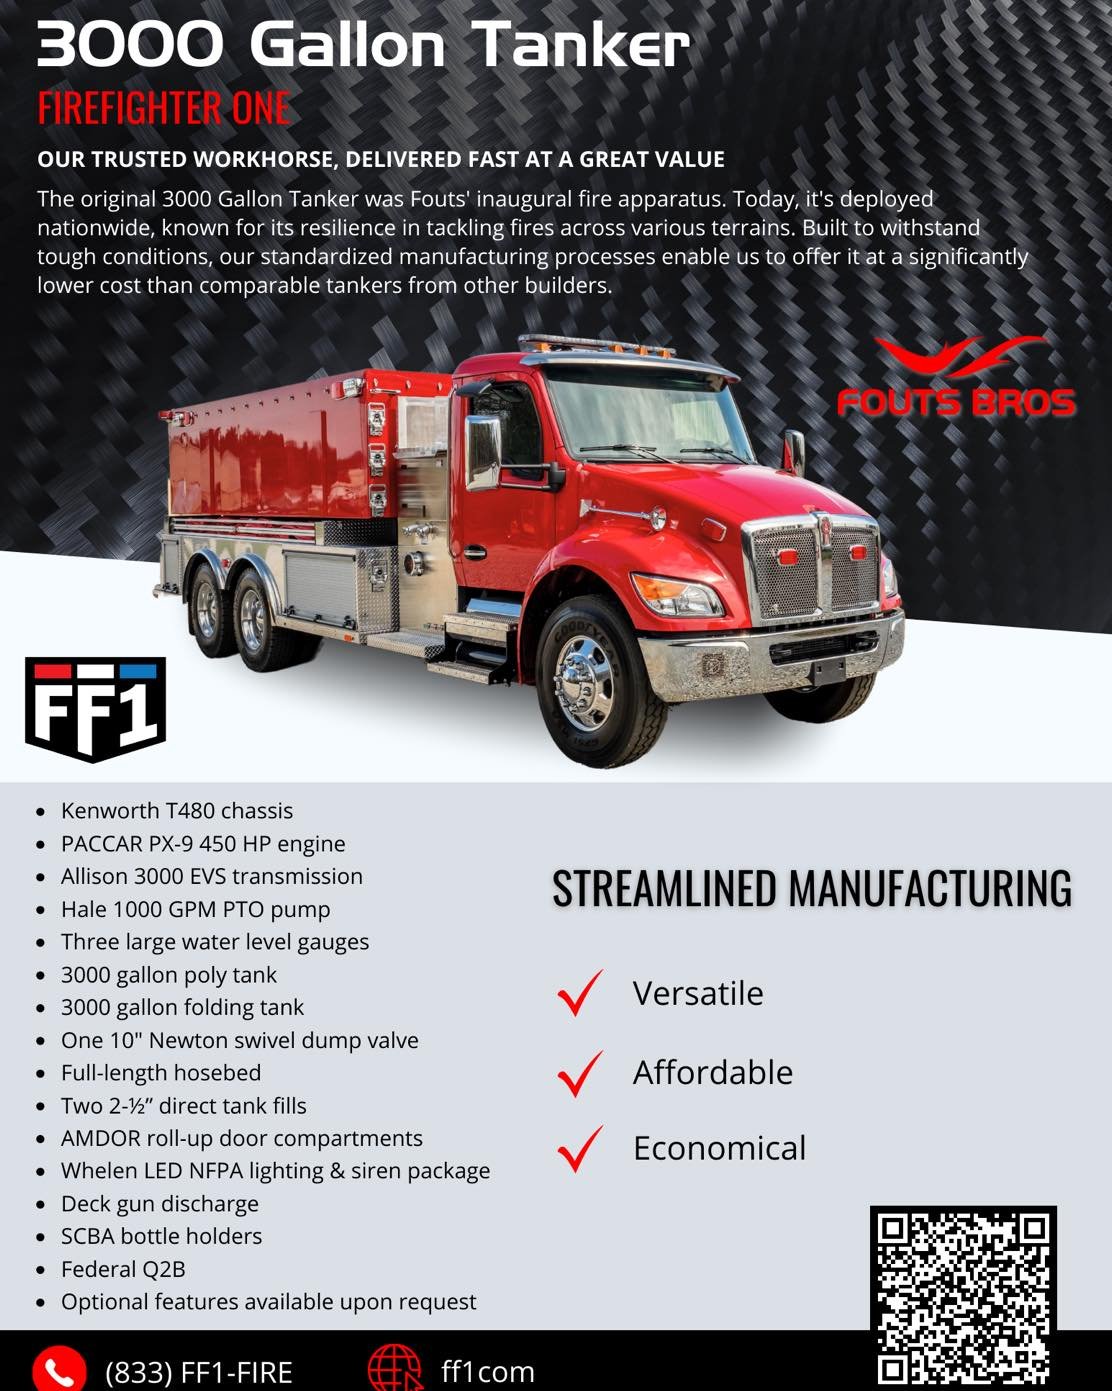 Need a tanker? Get one fast from FF1! Fouts Bros Tankers are available for nearly immediate delivery!! Don&rsquo;t wait on this!! 

@foutsbros 
#tanker #jobtown #firetrucksofamerica #fireapparatus #tanker #rescuetrucks #minipumper #rescuetruck #FF1Fa